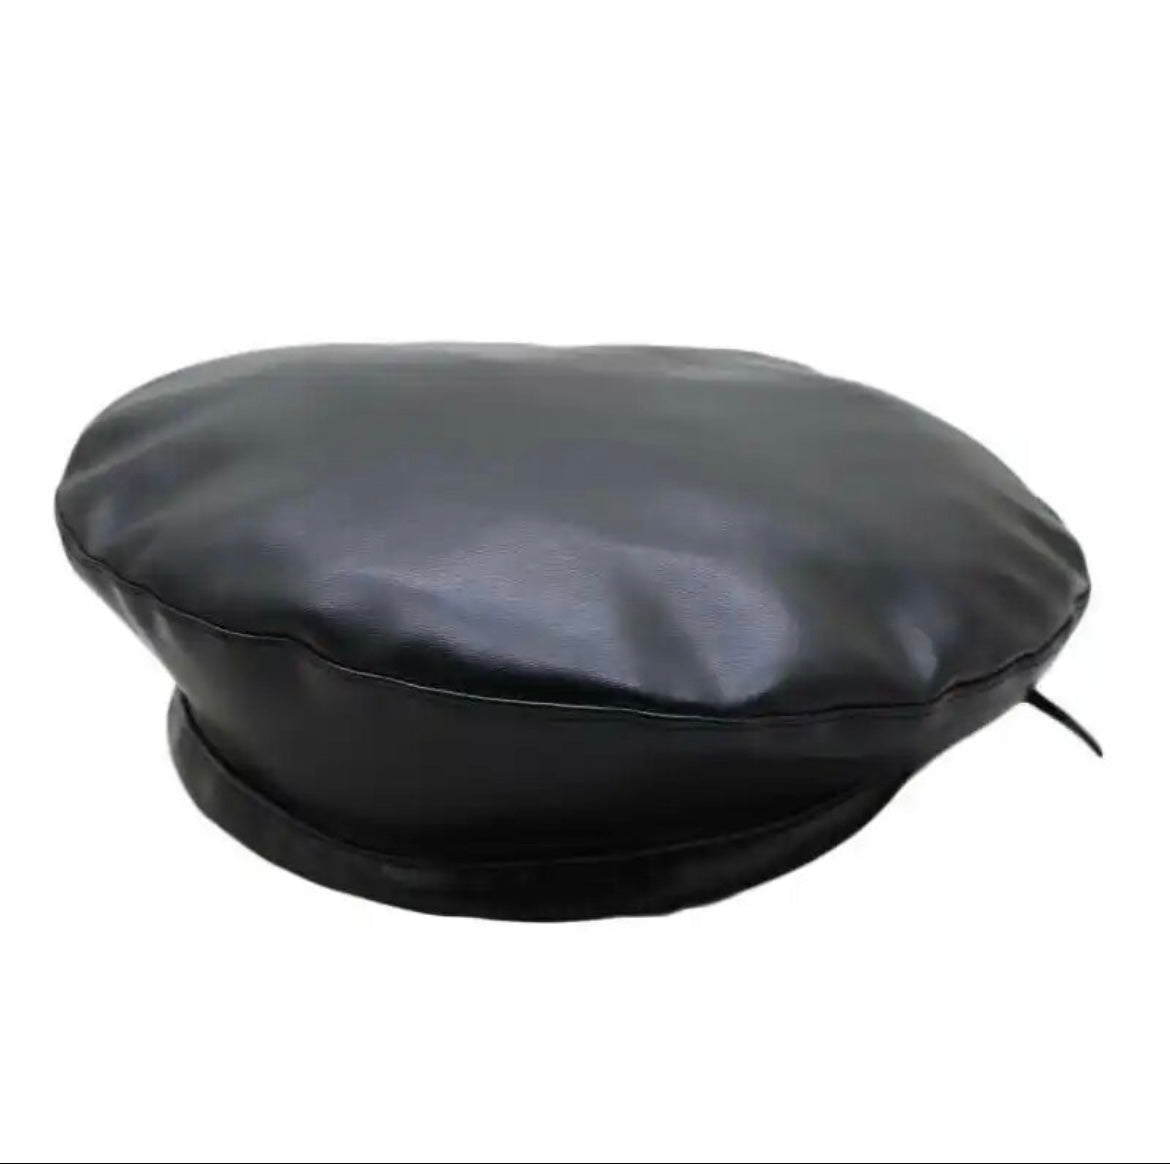 A Leather Beret To Slay your Day... Statement Beret